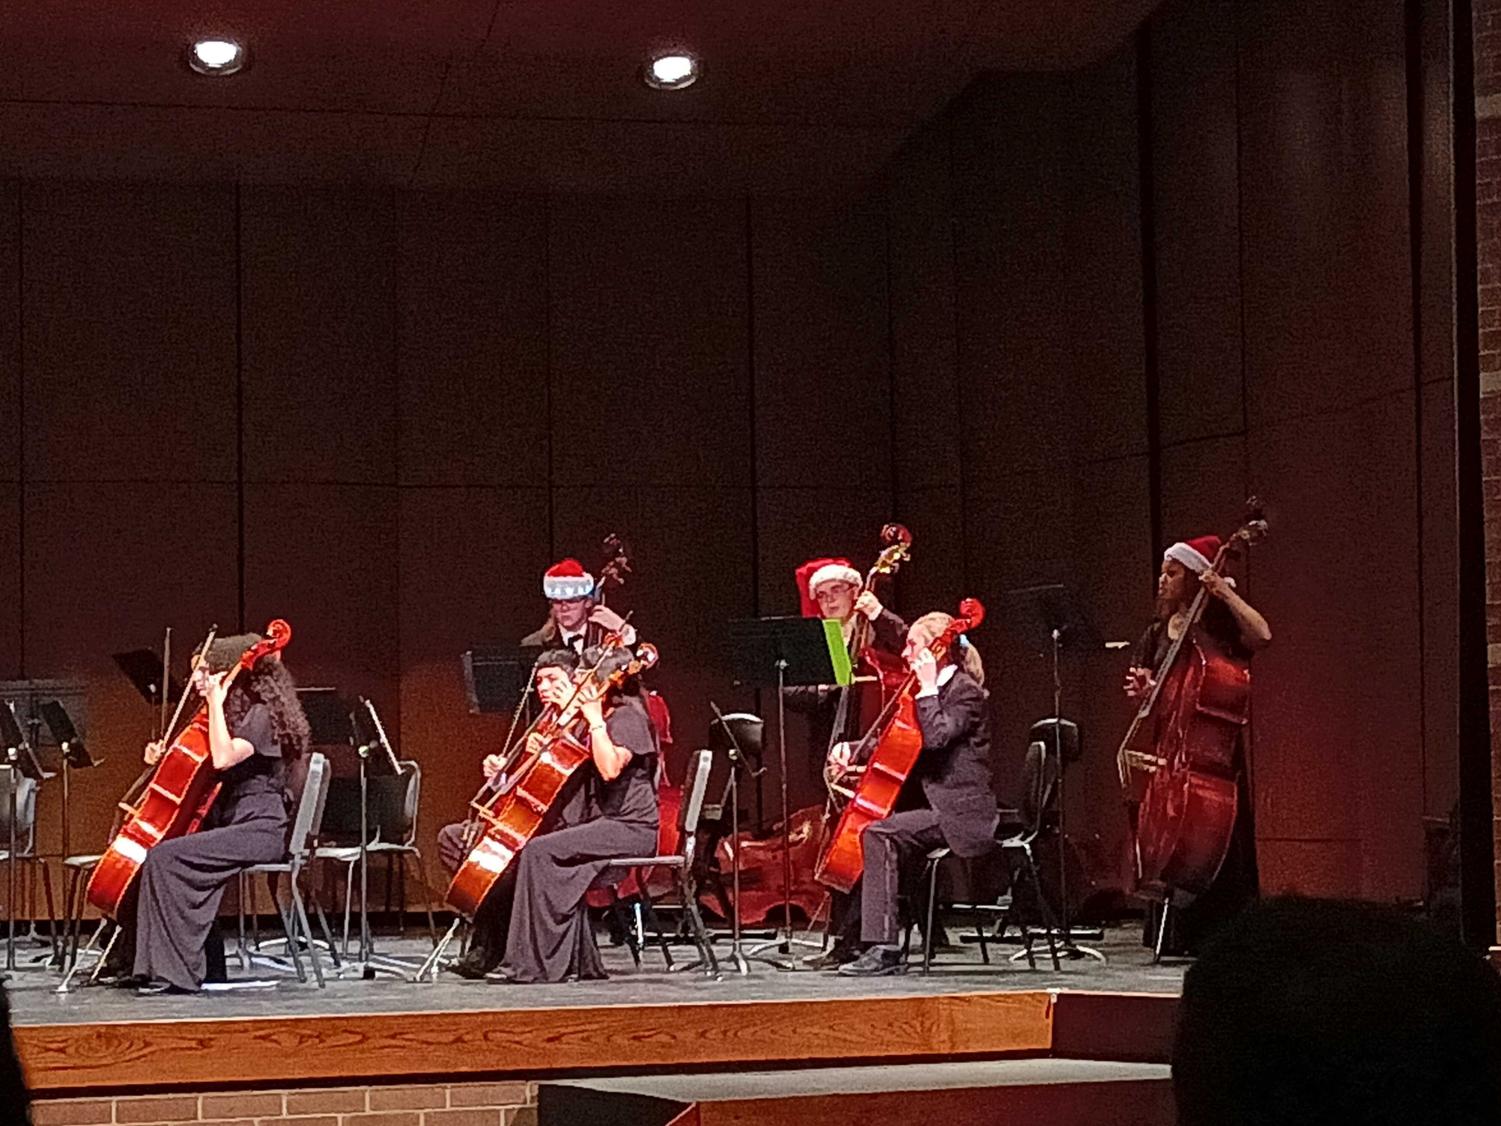 Orchestra+performs+holiday+concert+to+spread+Christmas+cheer